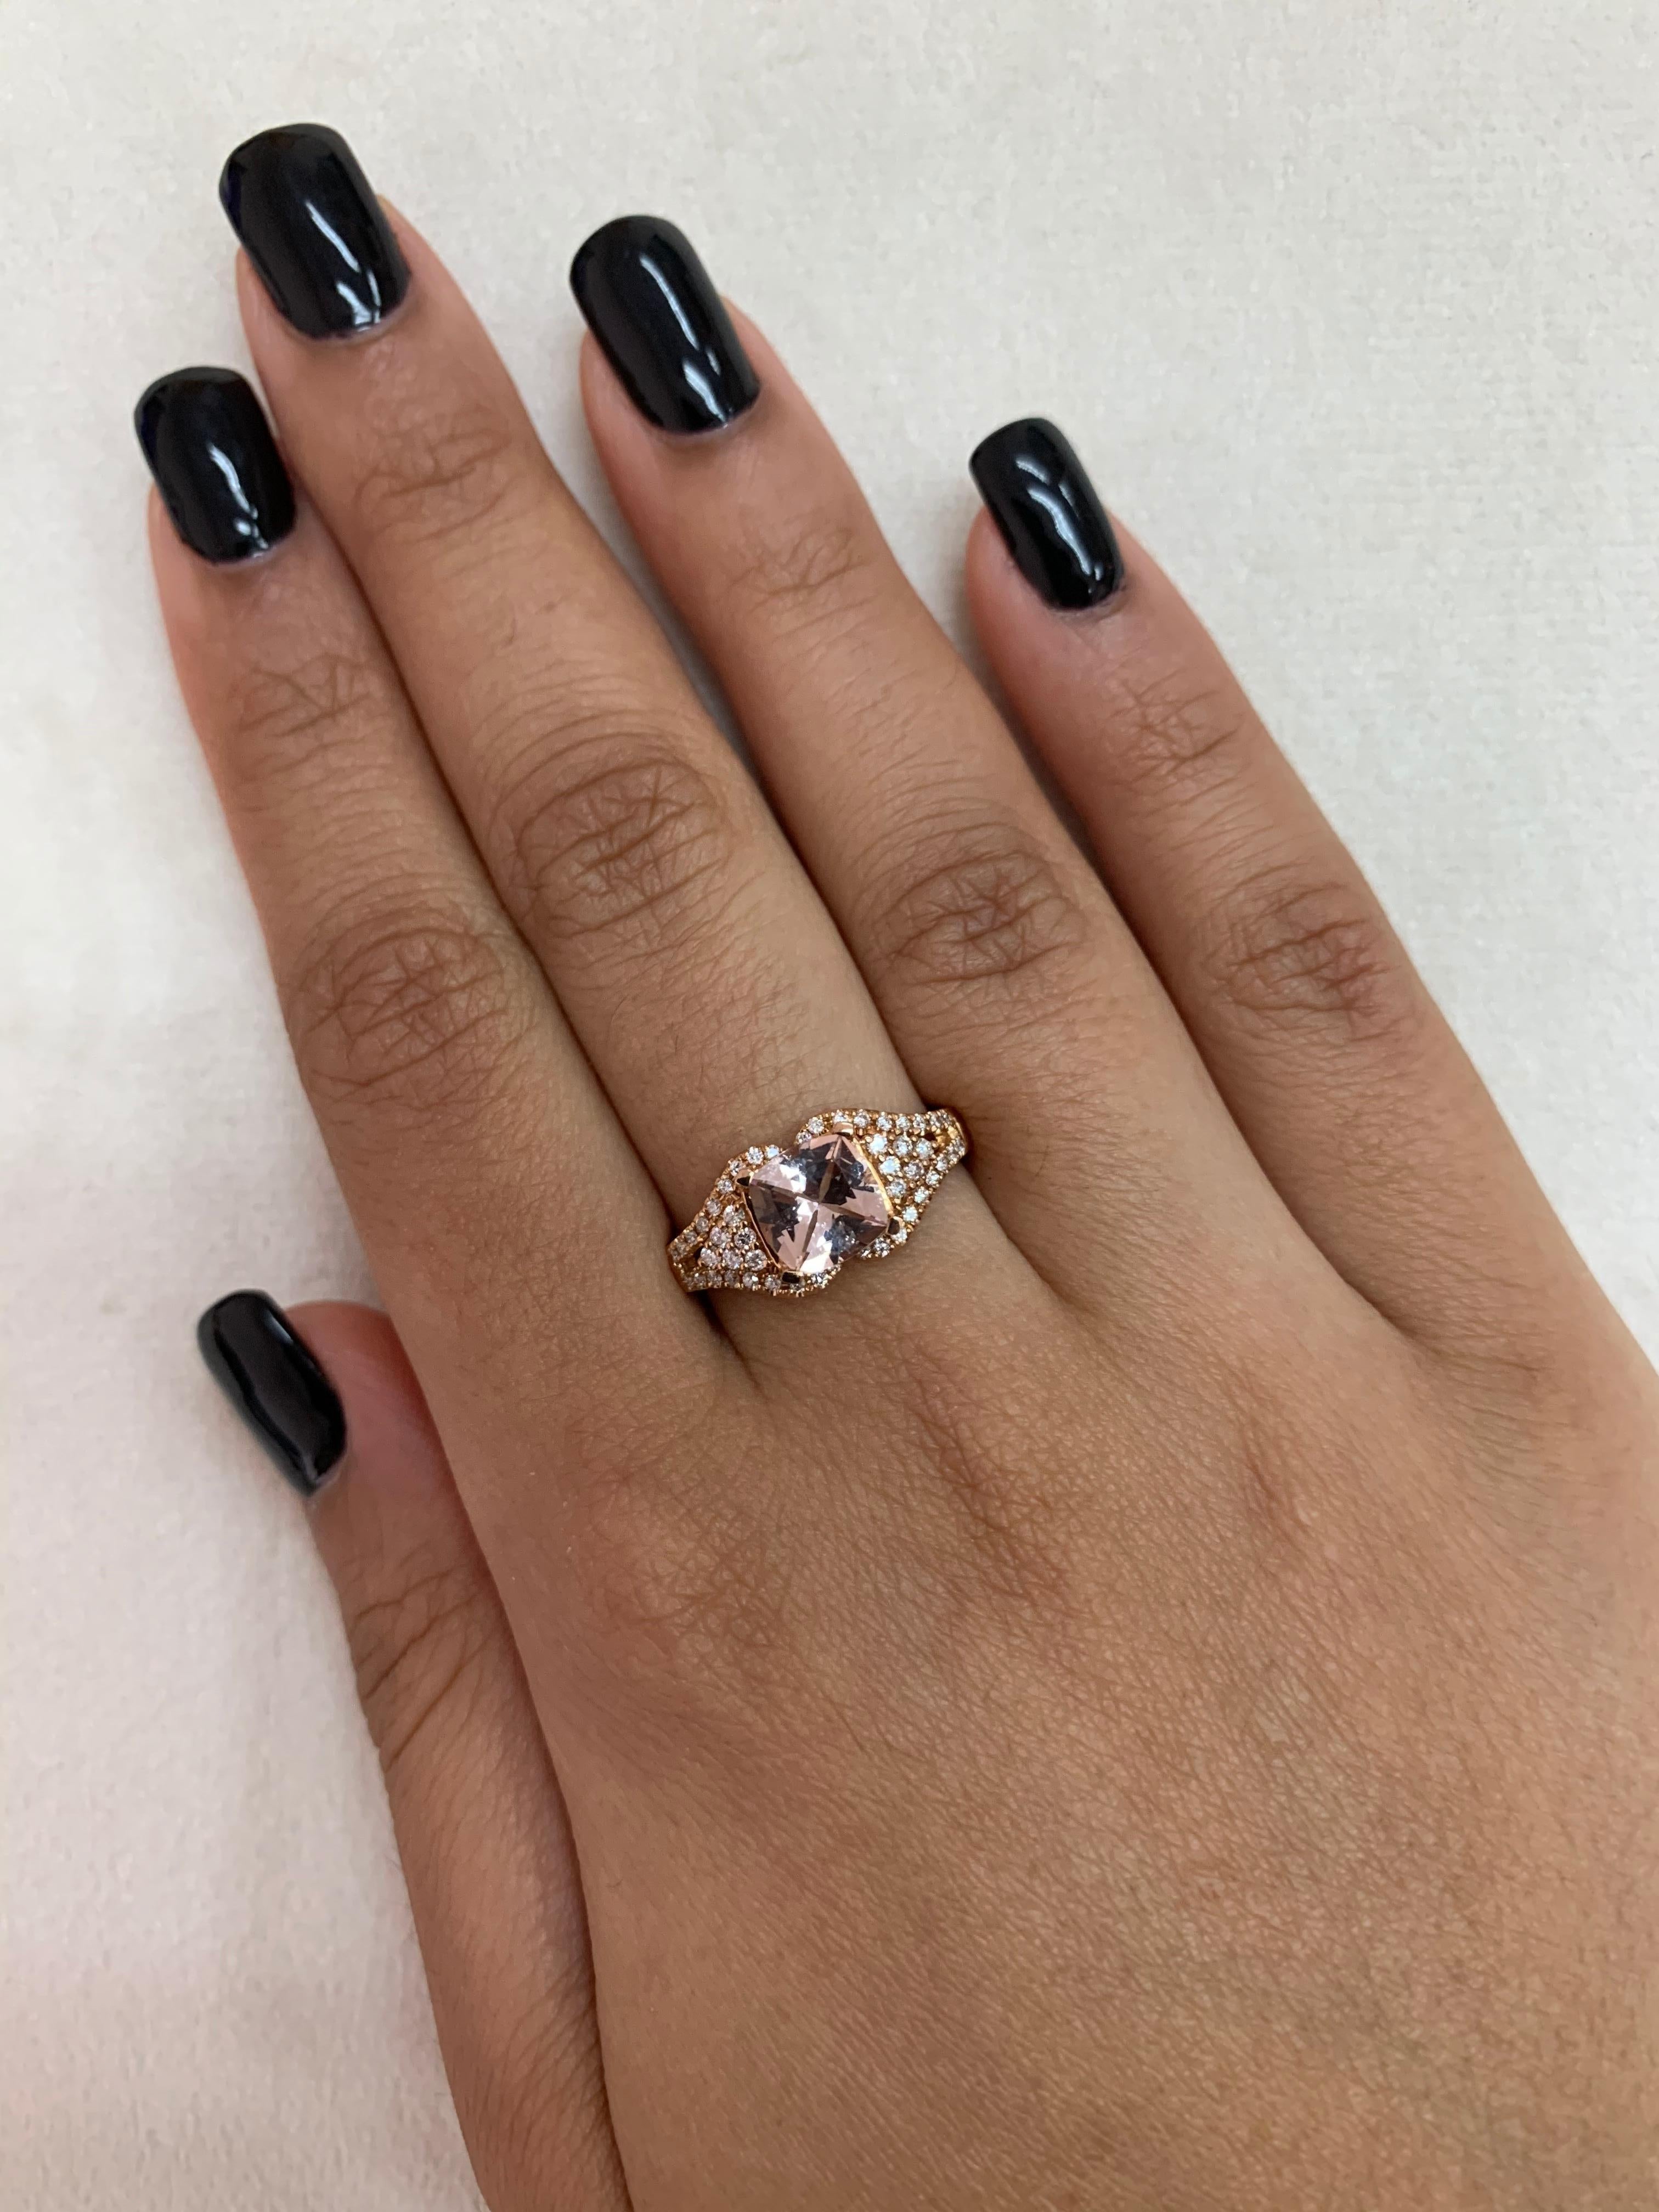 This collection features an array of magnificent morganites! Accented with diamonds these rings are made in rose gold and present a classic yet elegant look. 

Classic morganite ring in 18K rose gold with diamonds. 

Morganite: 1.2 carat cushion